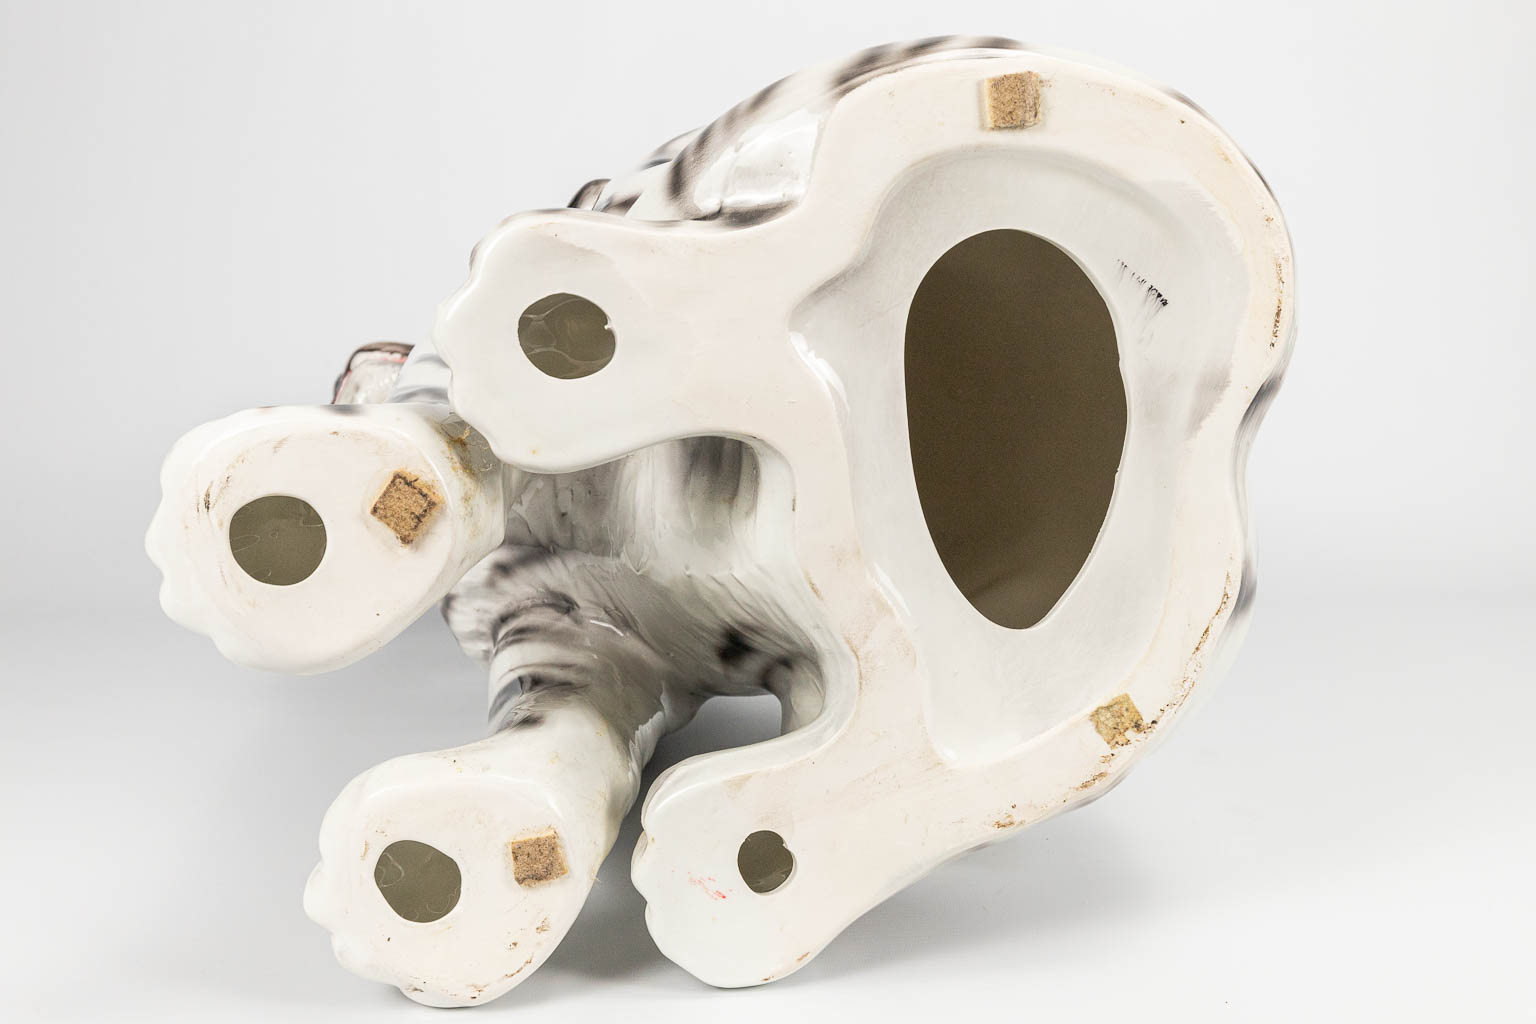 A ceramic statue of a white tiger with black stripes. Made in Italy. 